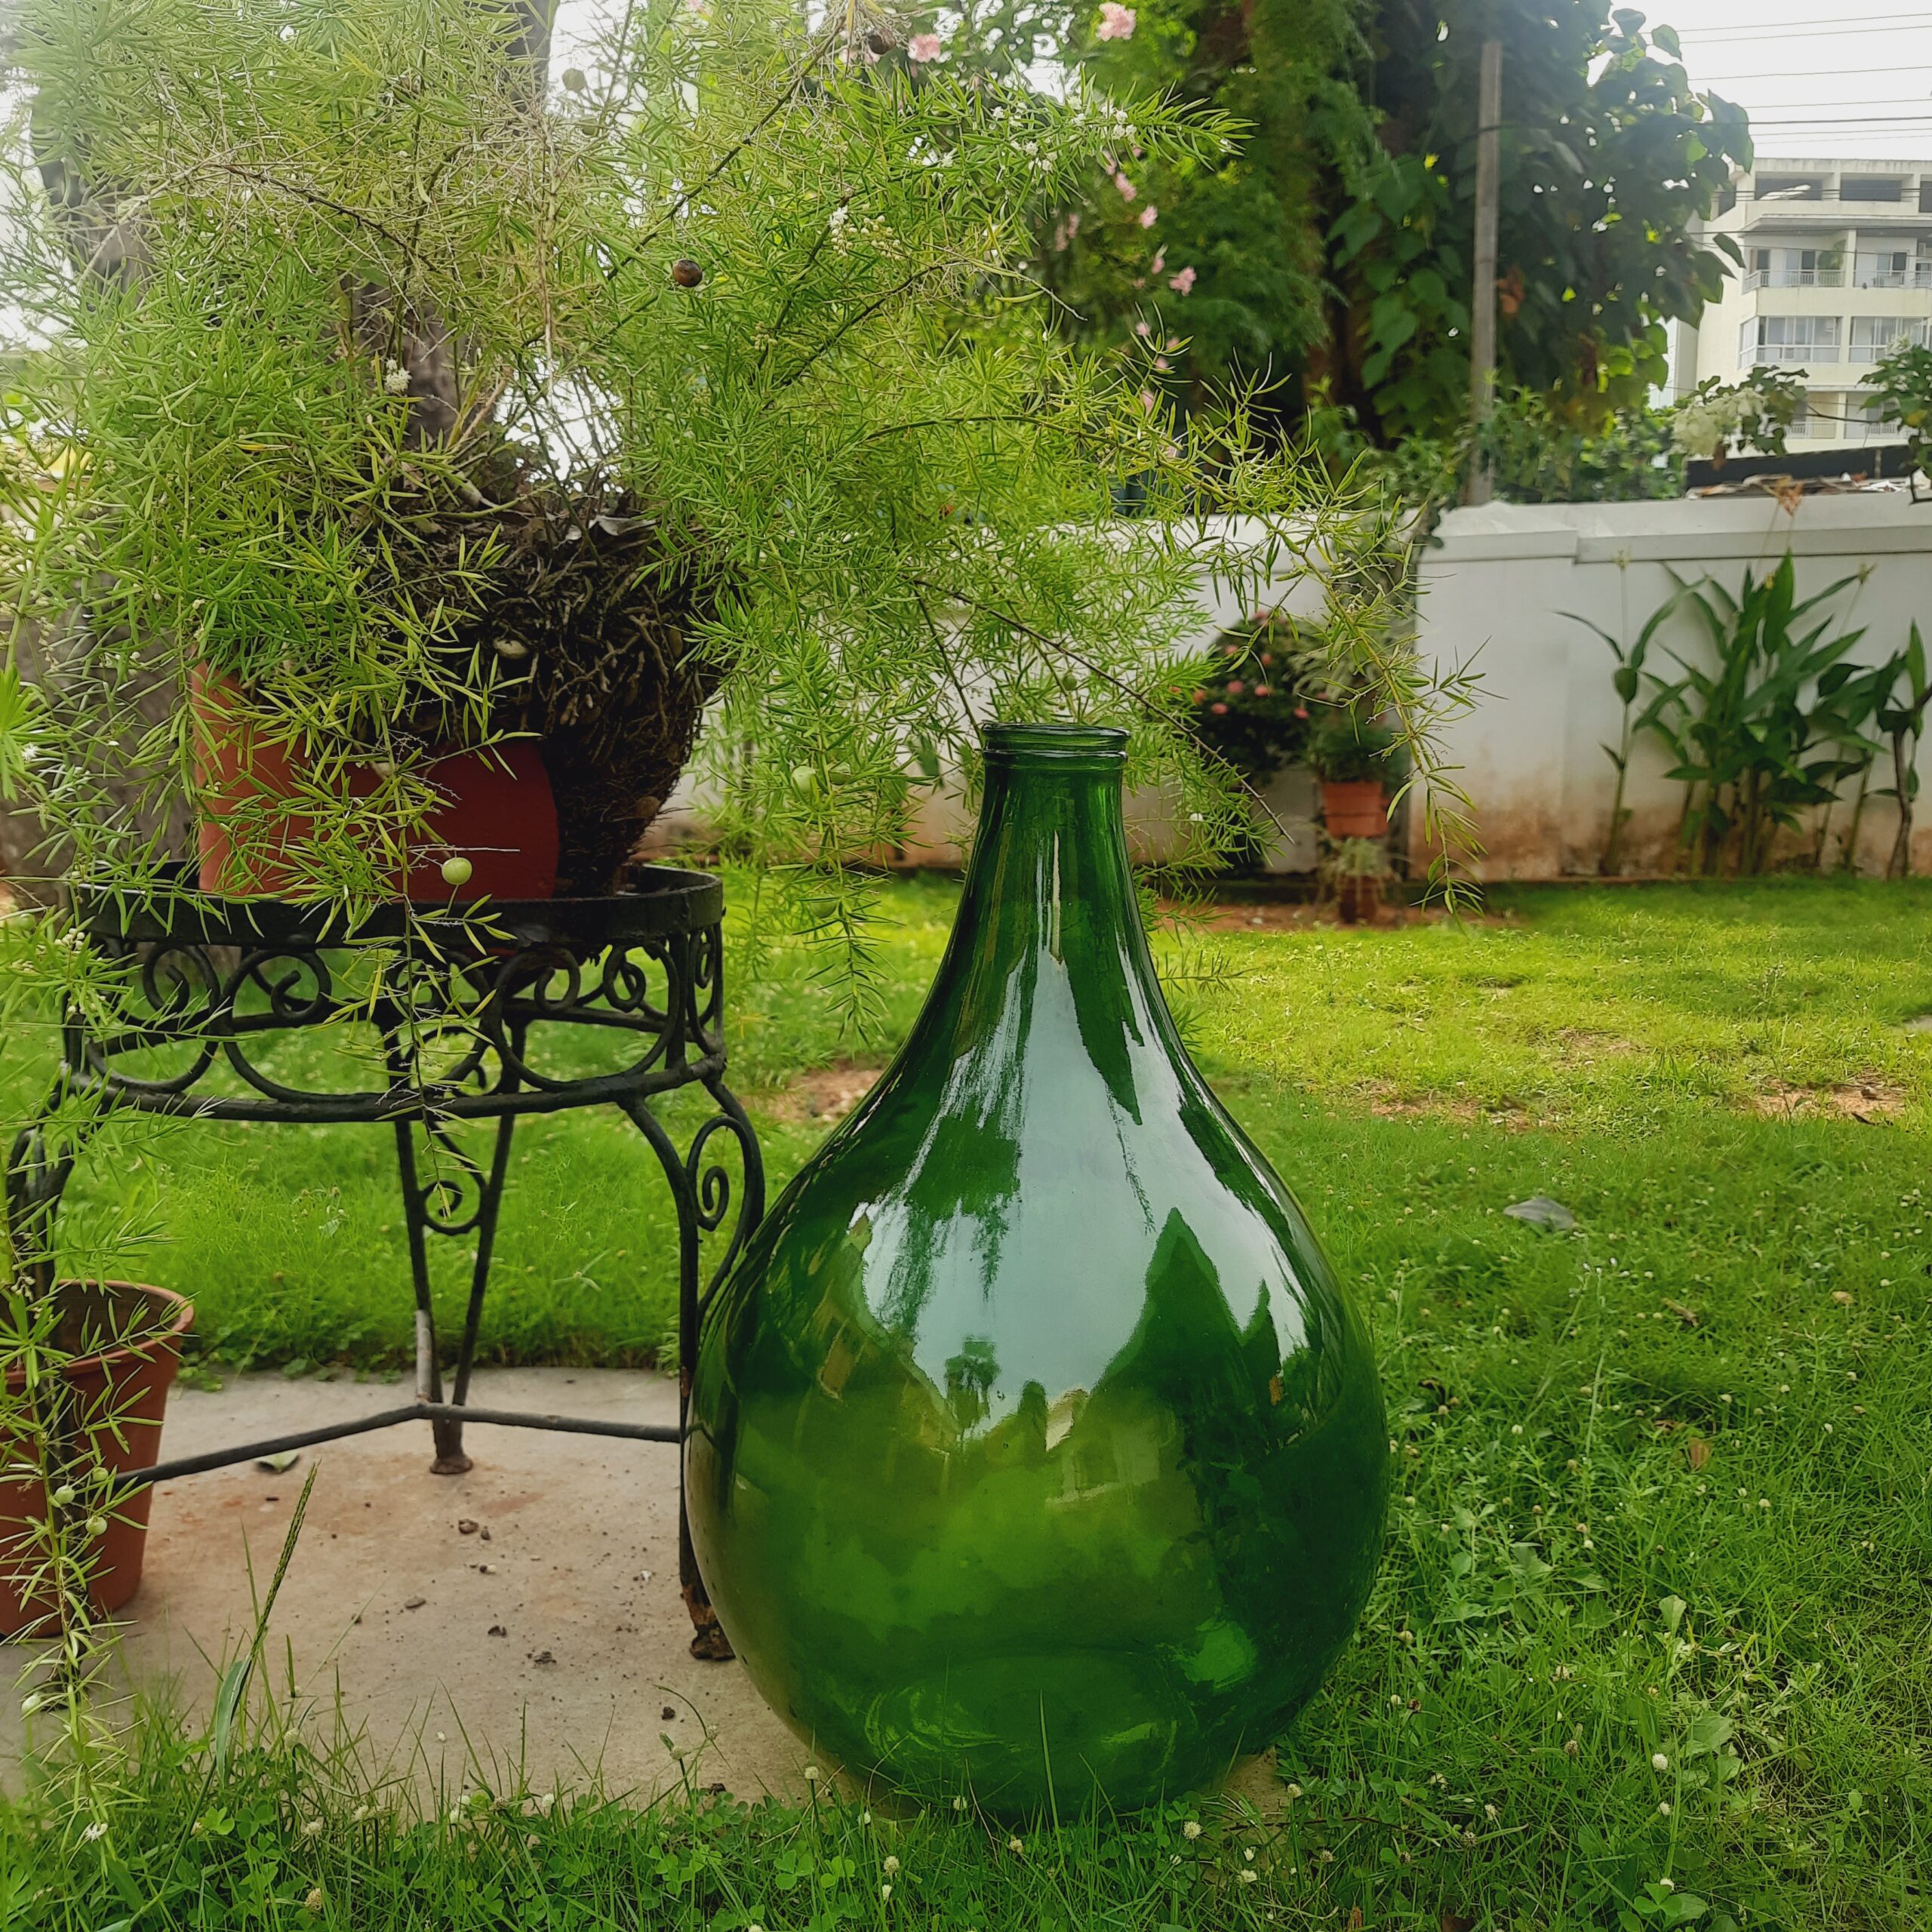 Demijohns in Indian Decor | Green vintage demijohn with green plants in a garden